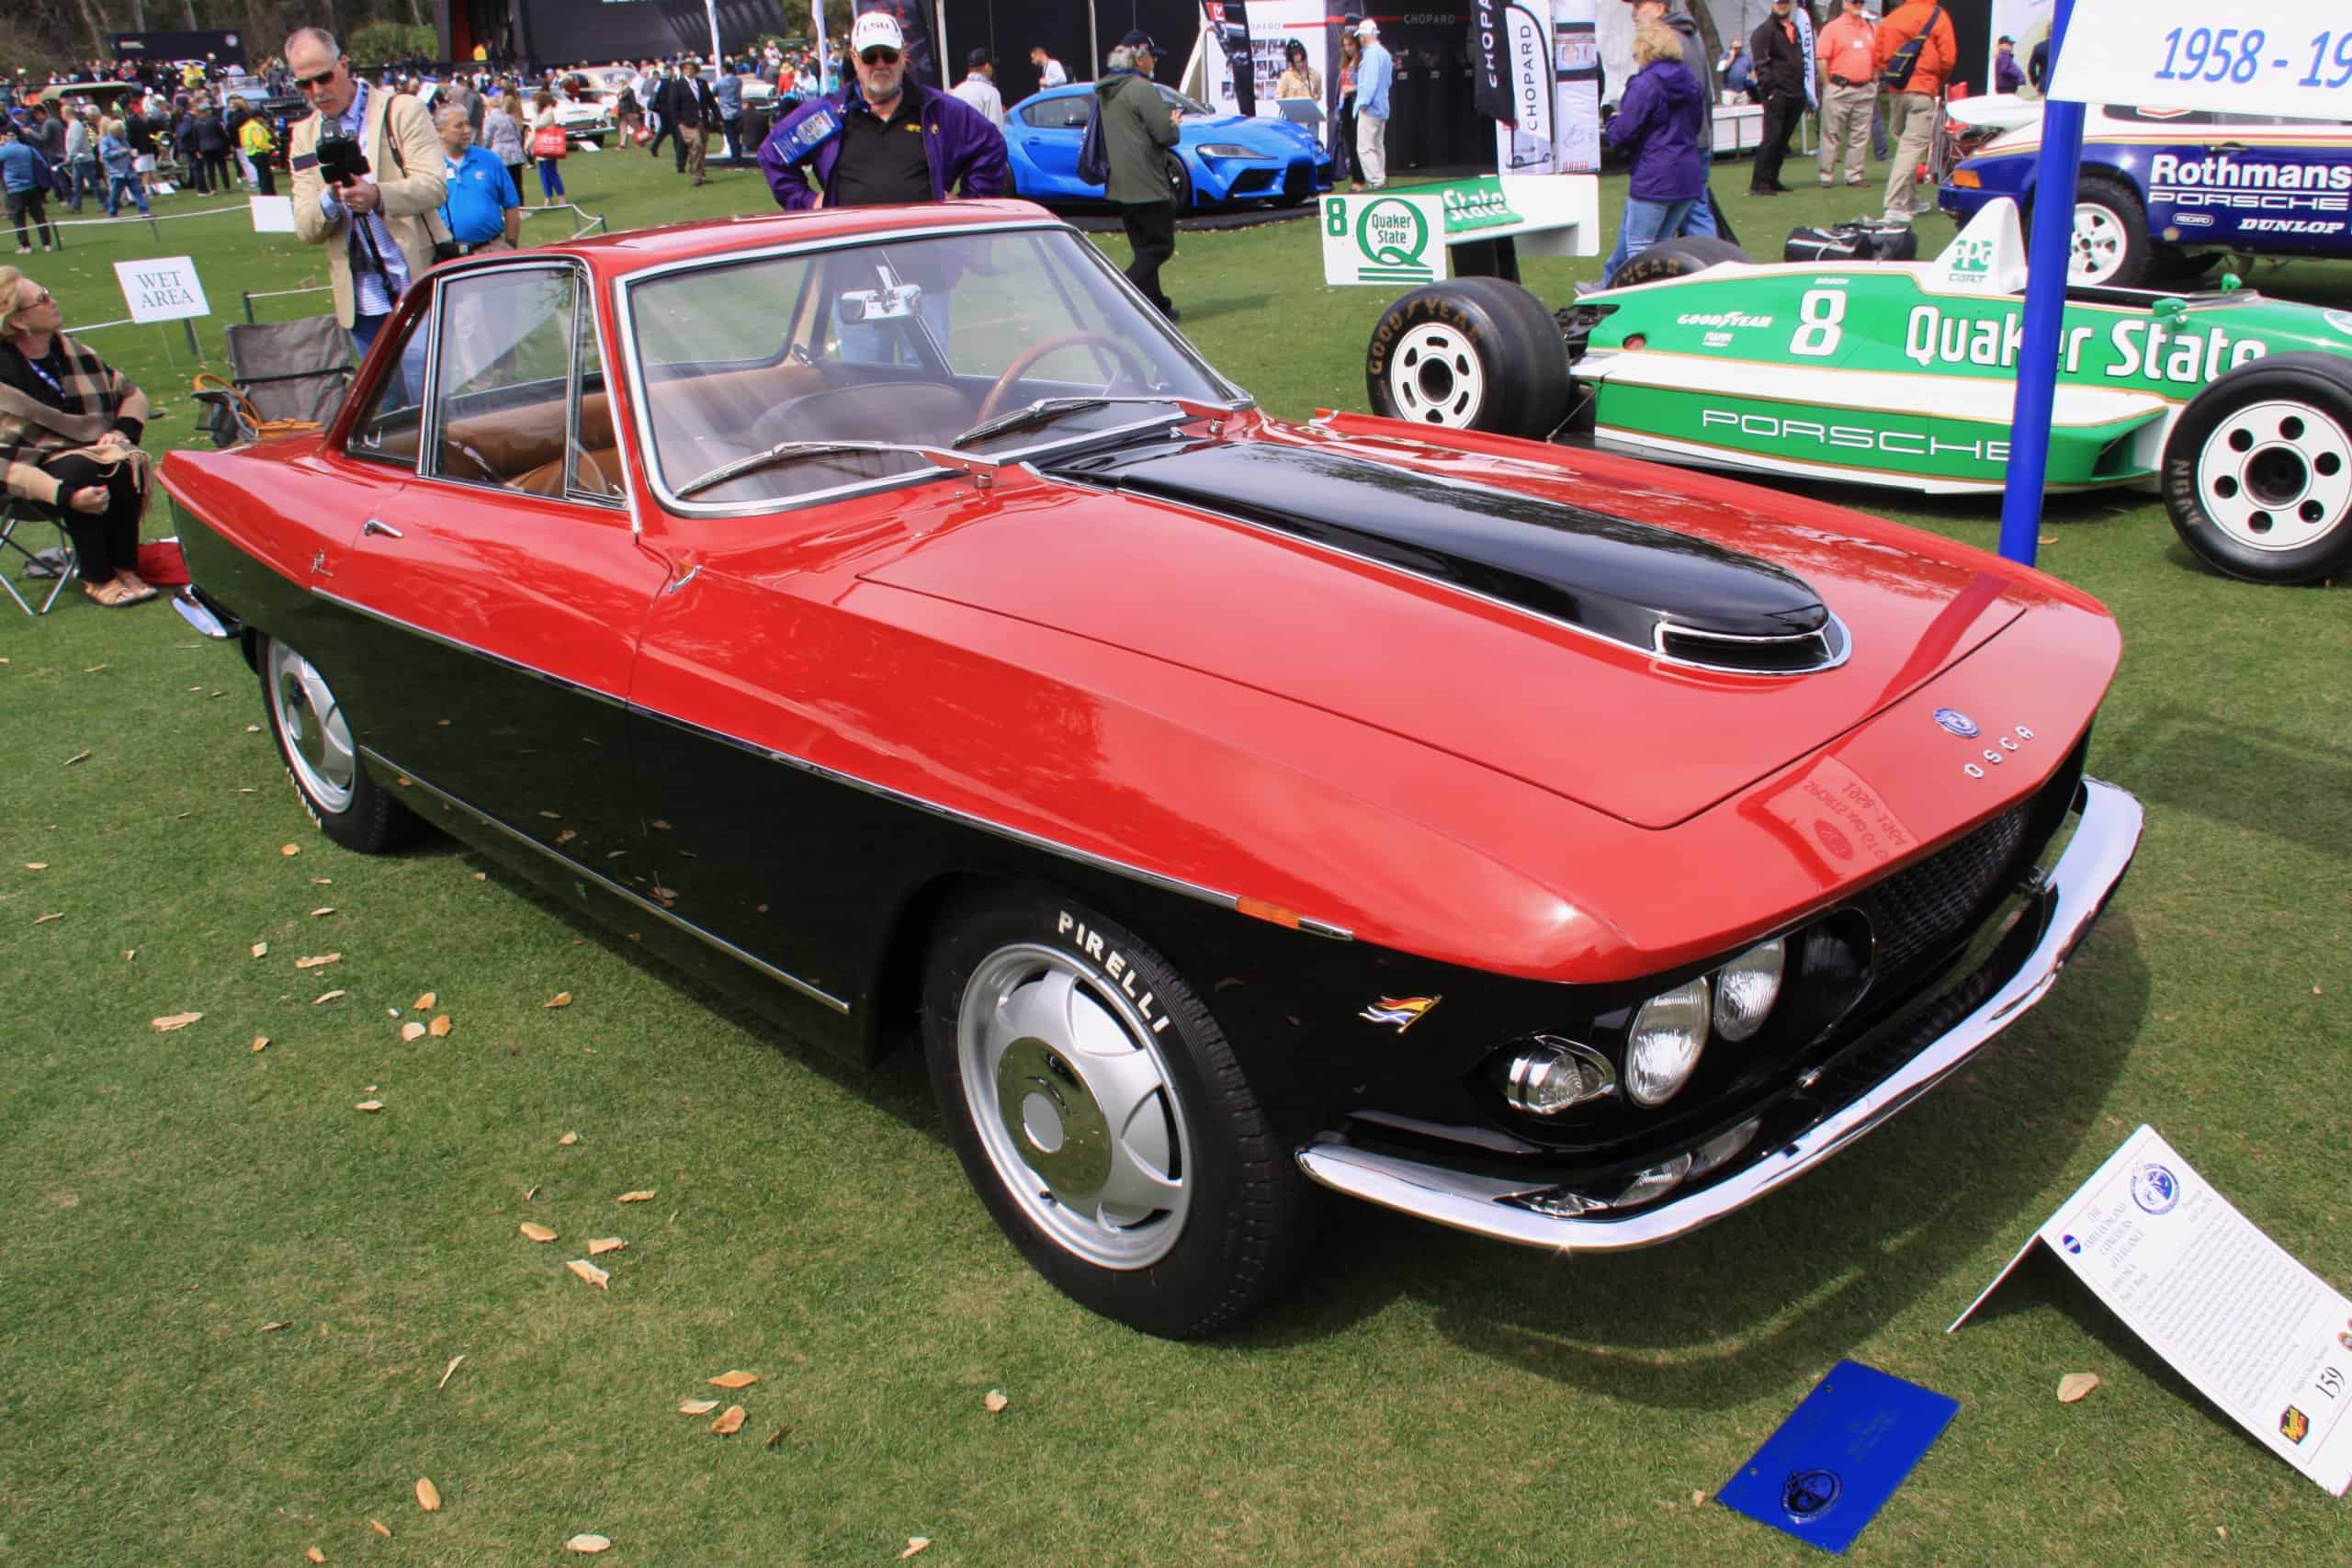 Amelia Island, In Year 25, the racing heart of the Amelia Island Concours still beats strong, ClassicCars.com Journal